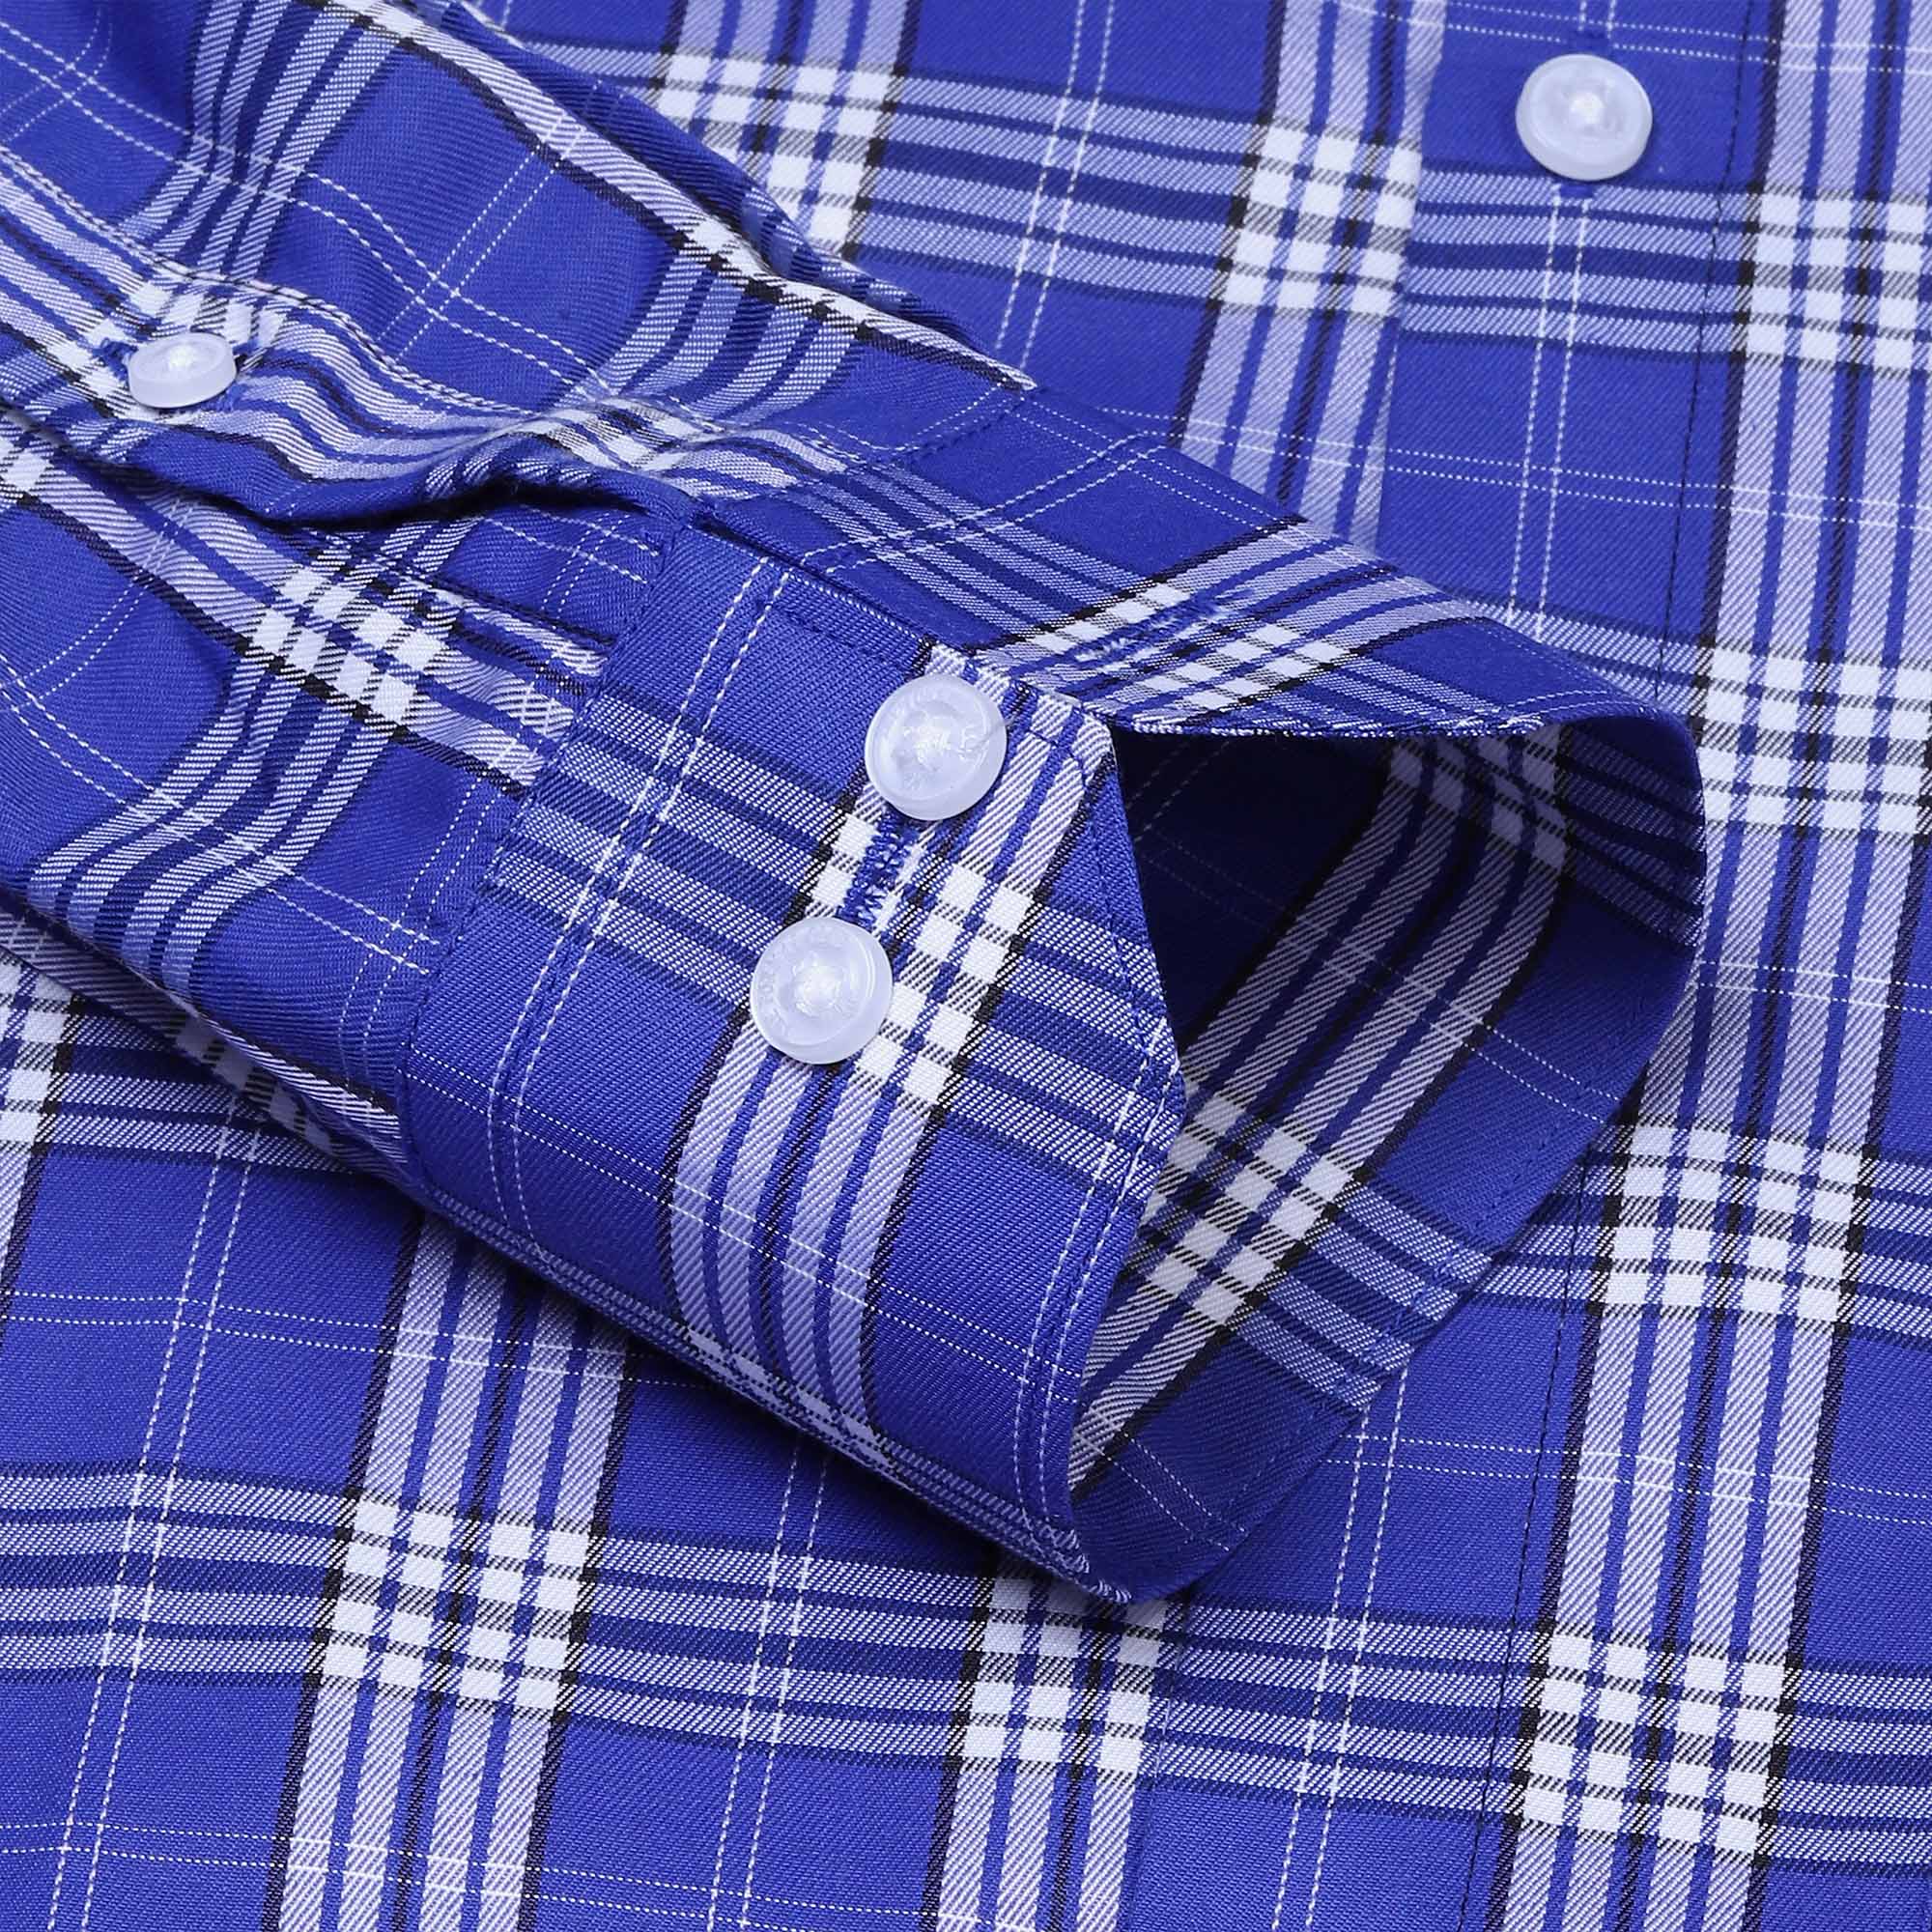 Vento Twill Check Shirt in Royal Blue & White - The Formal Club